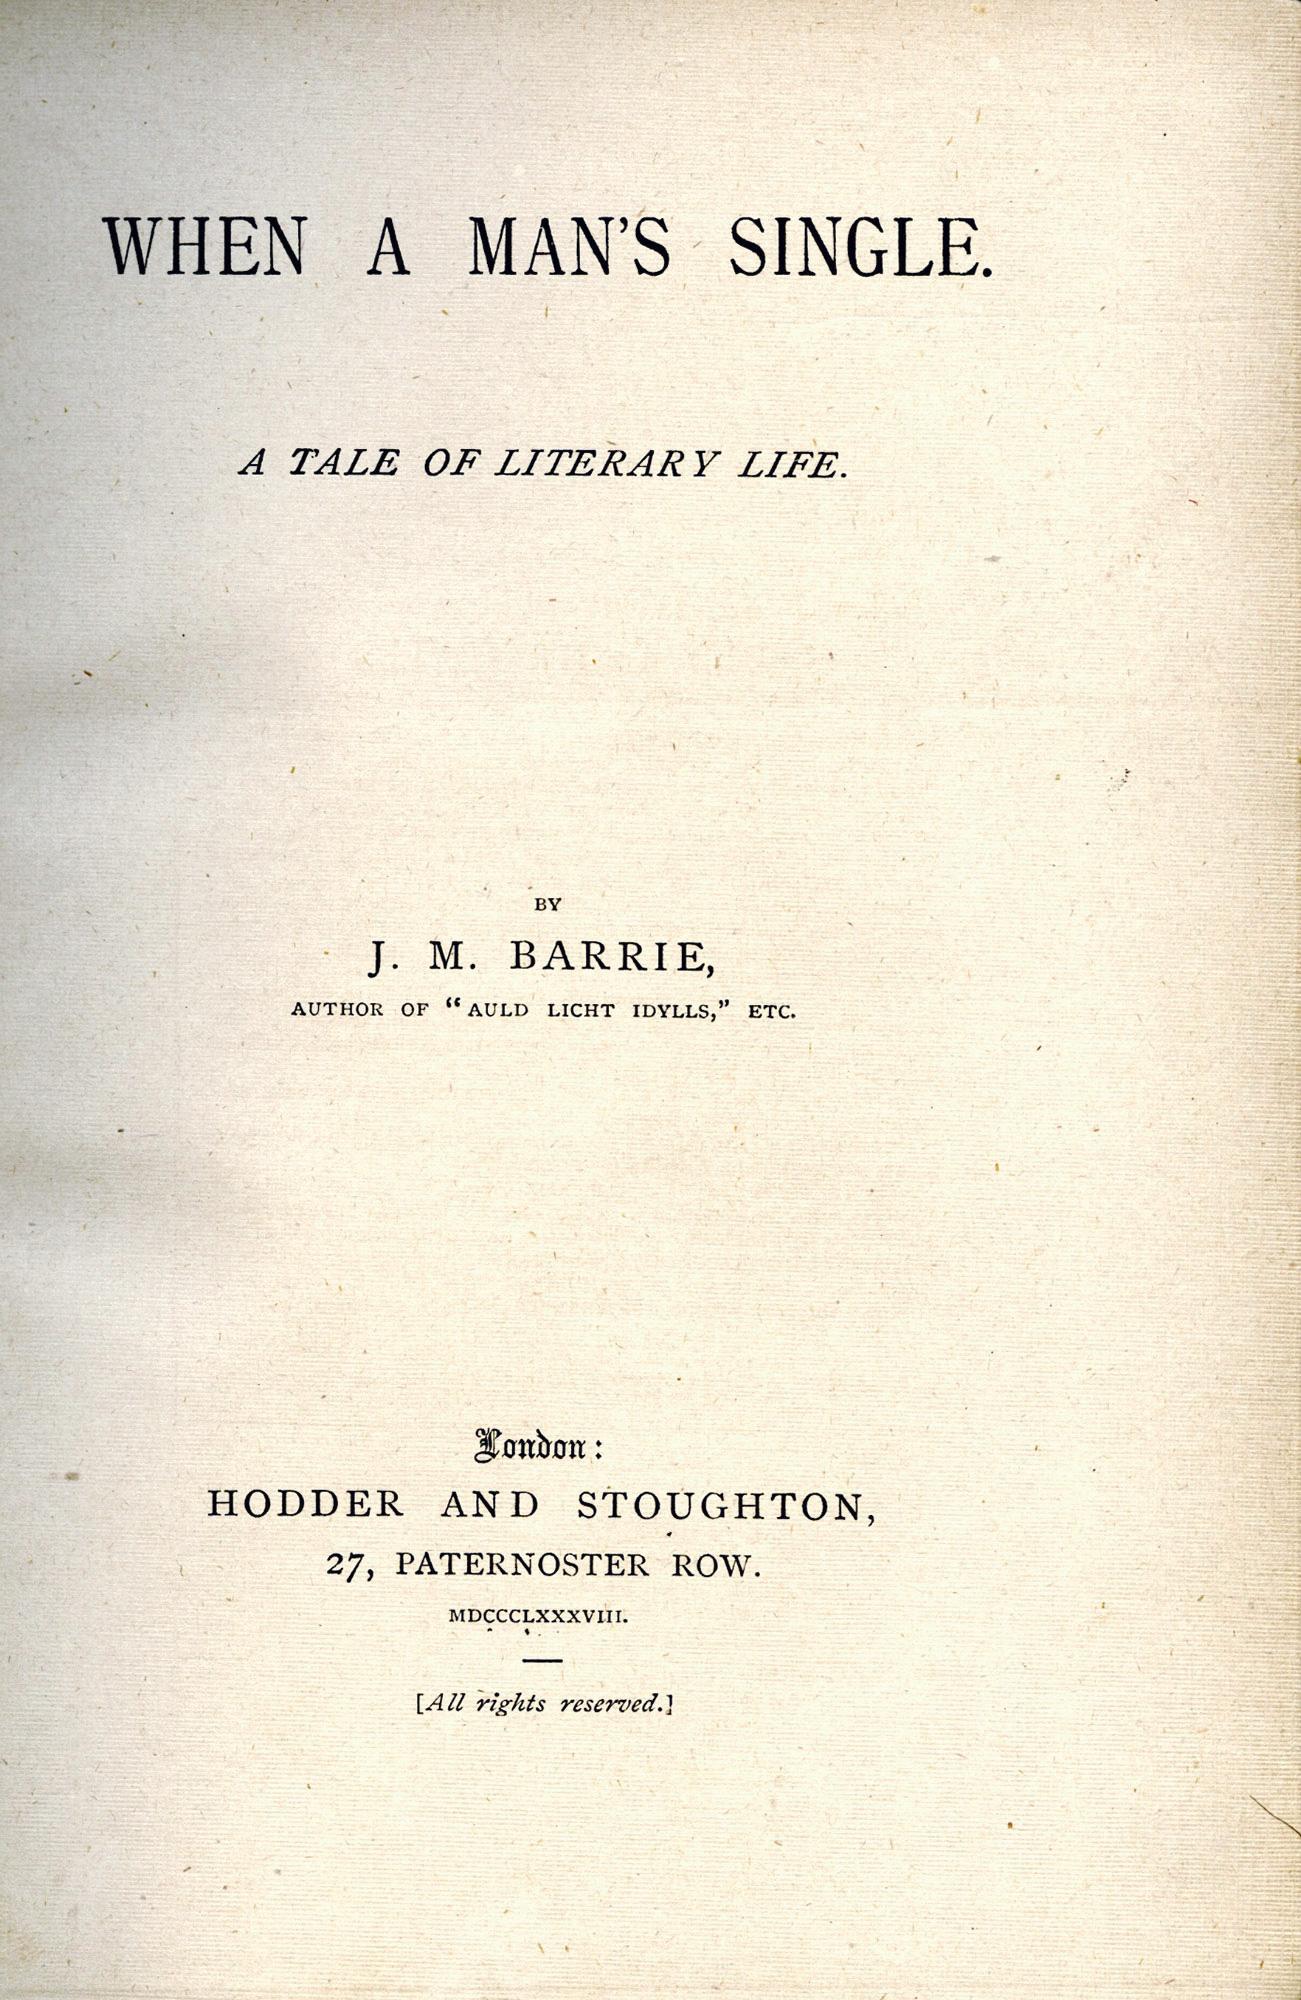 Barrie, J.M. When A Man's Single.  FIRST EDITION, FIRST ISSUE
London: Hodder and Stoughton, 1888
Small 8vo., 7 3/8 x 5 inches (188 x 127 mm), pp. 289 + 2 of publisher's advertising. Red calf binding by Root & Son (stamp on fly leaf) with gold